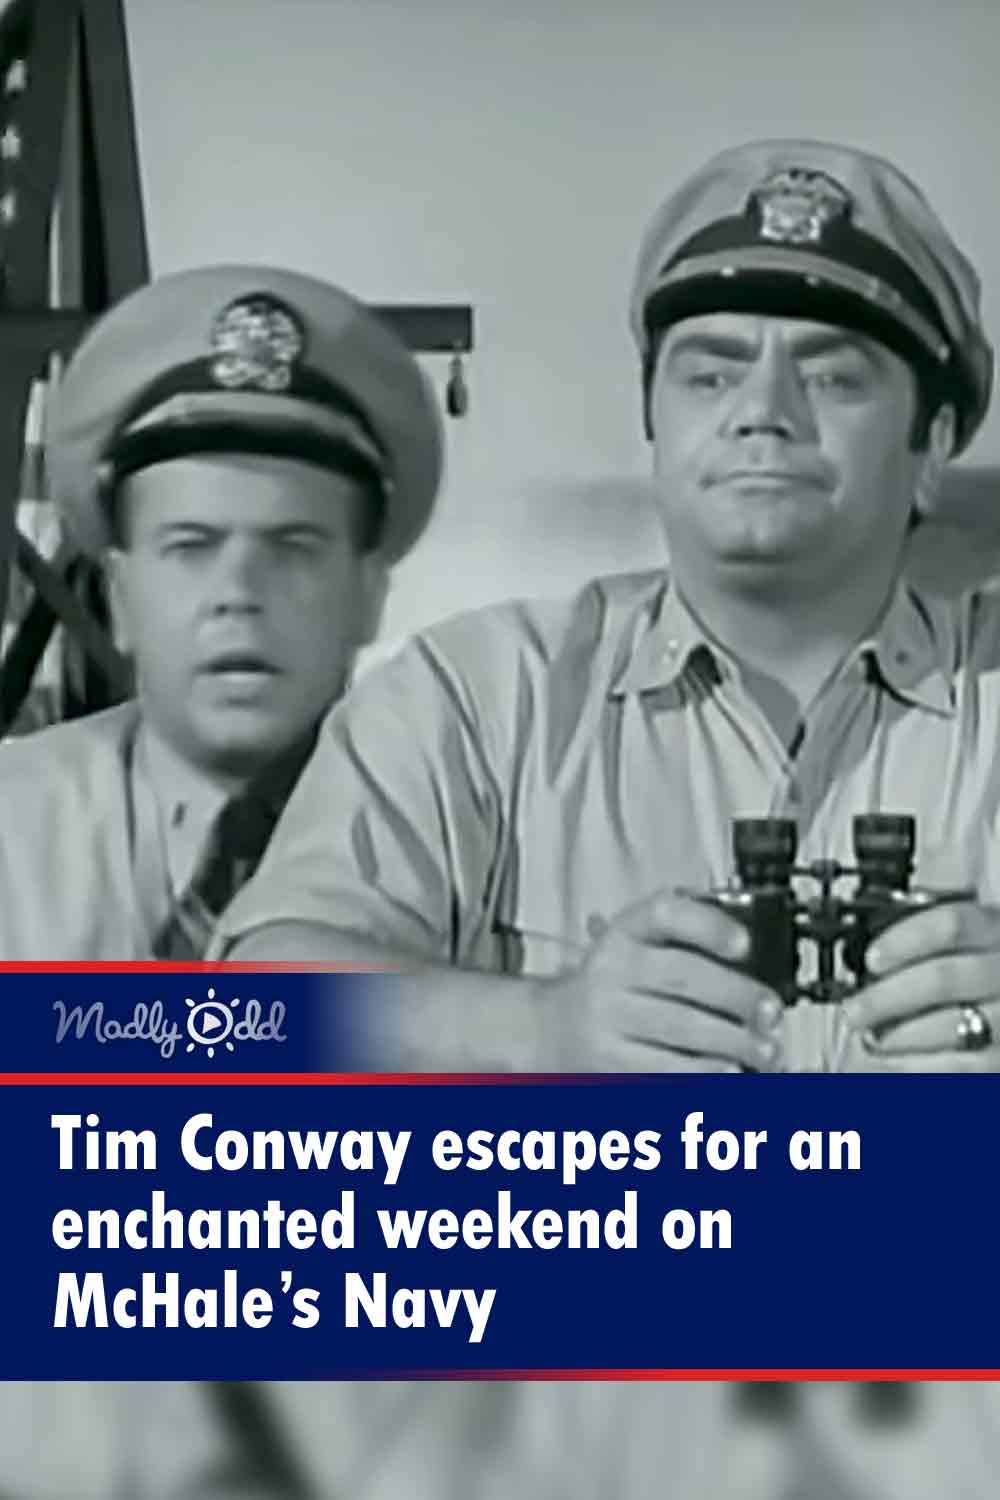 Tim Conway escapes for an enchanted weekend on McHale’s Navy